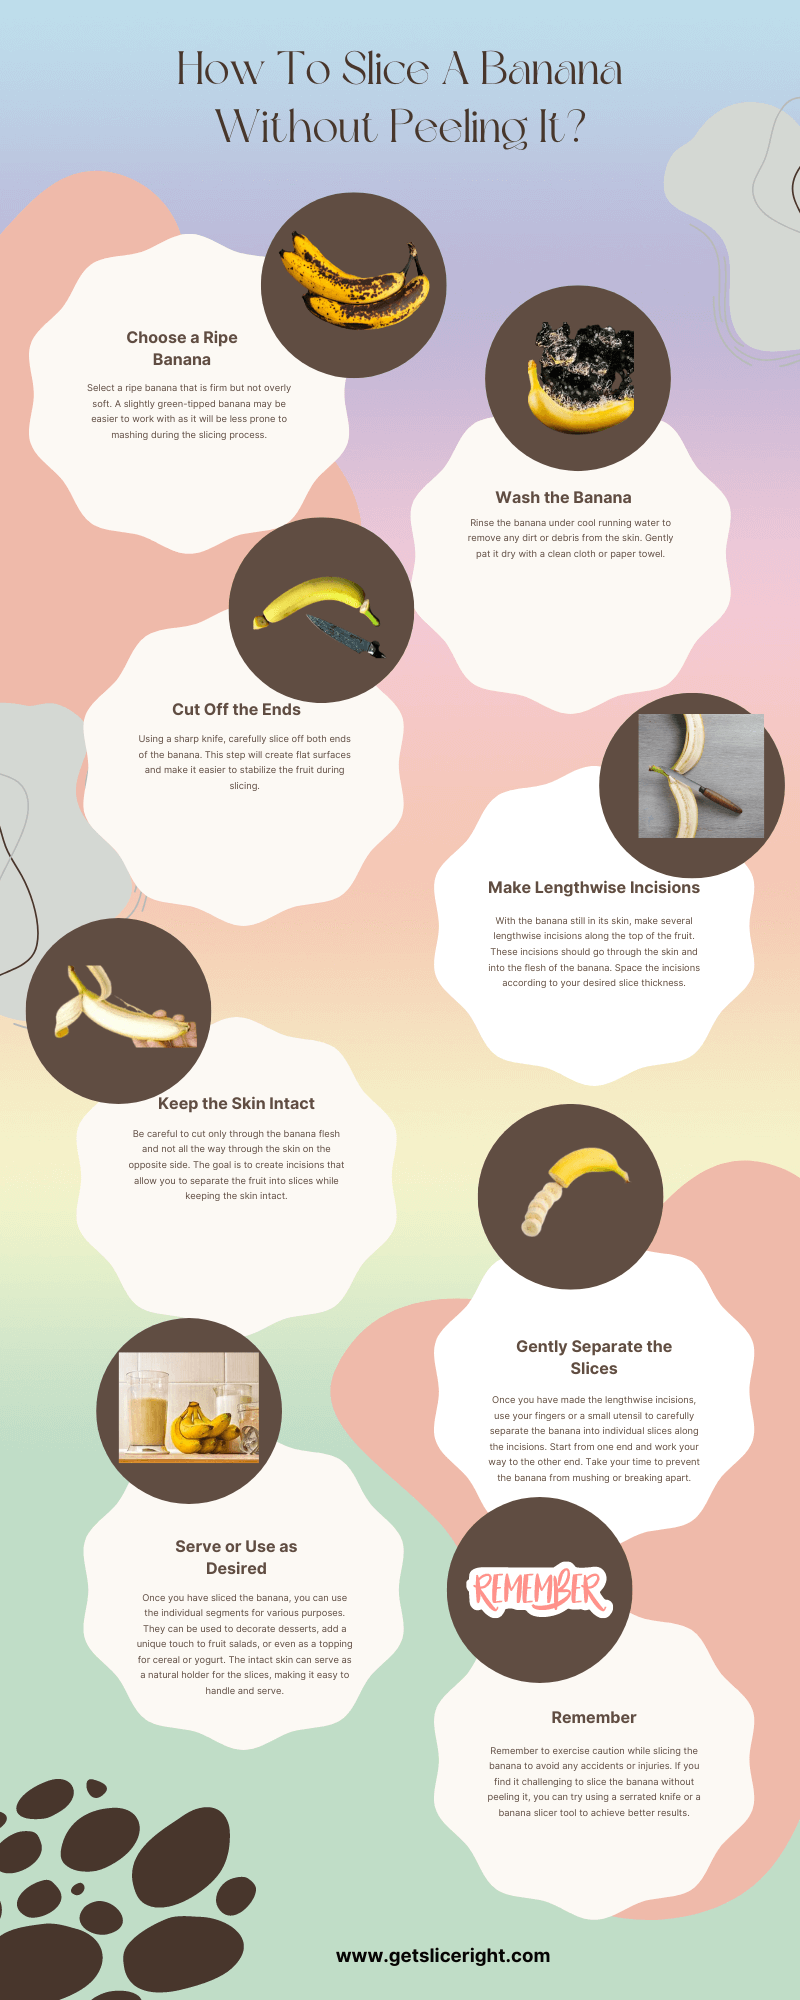 How to slice a banana without peeling it - infographic